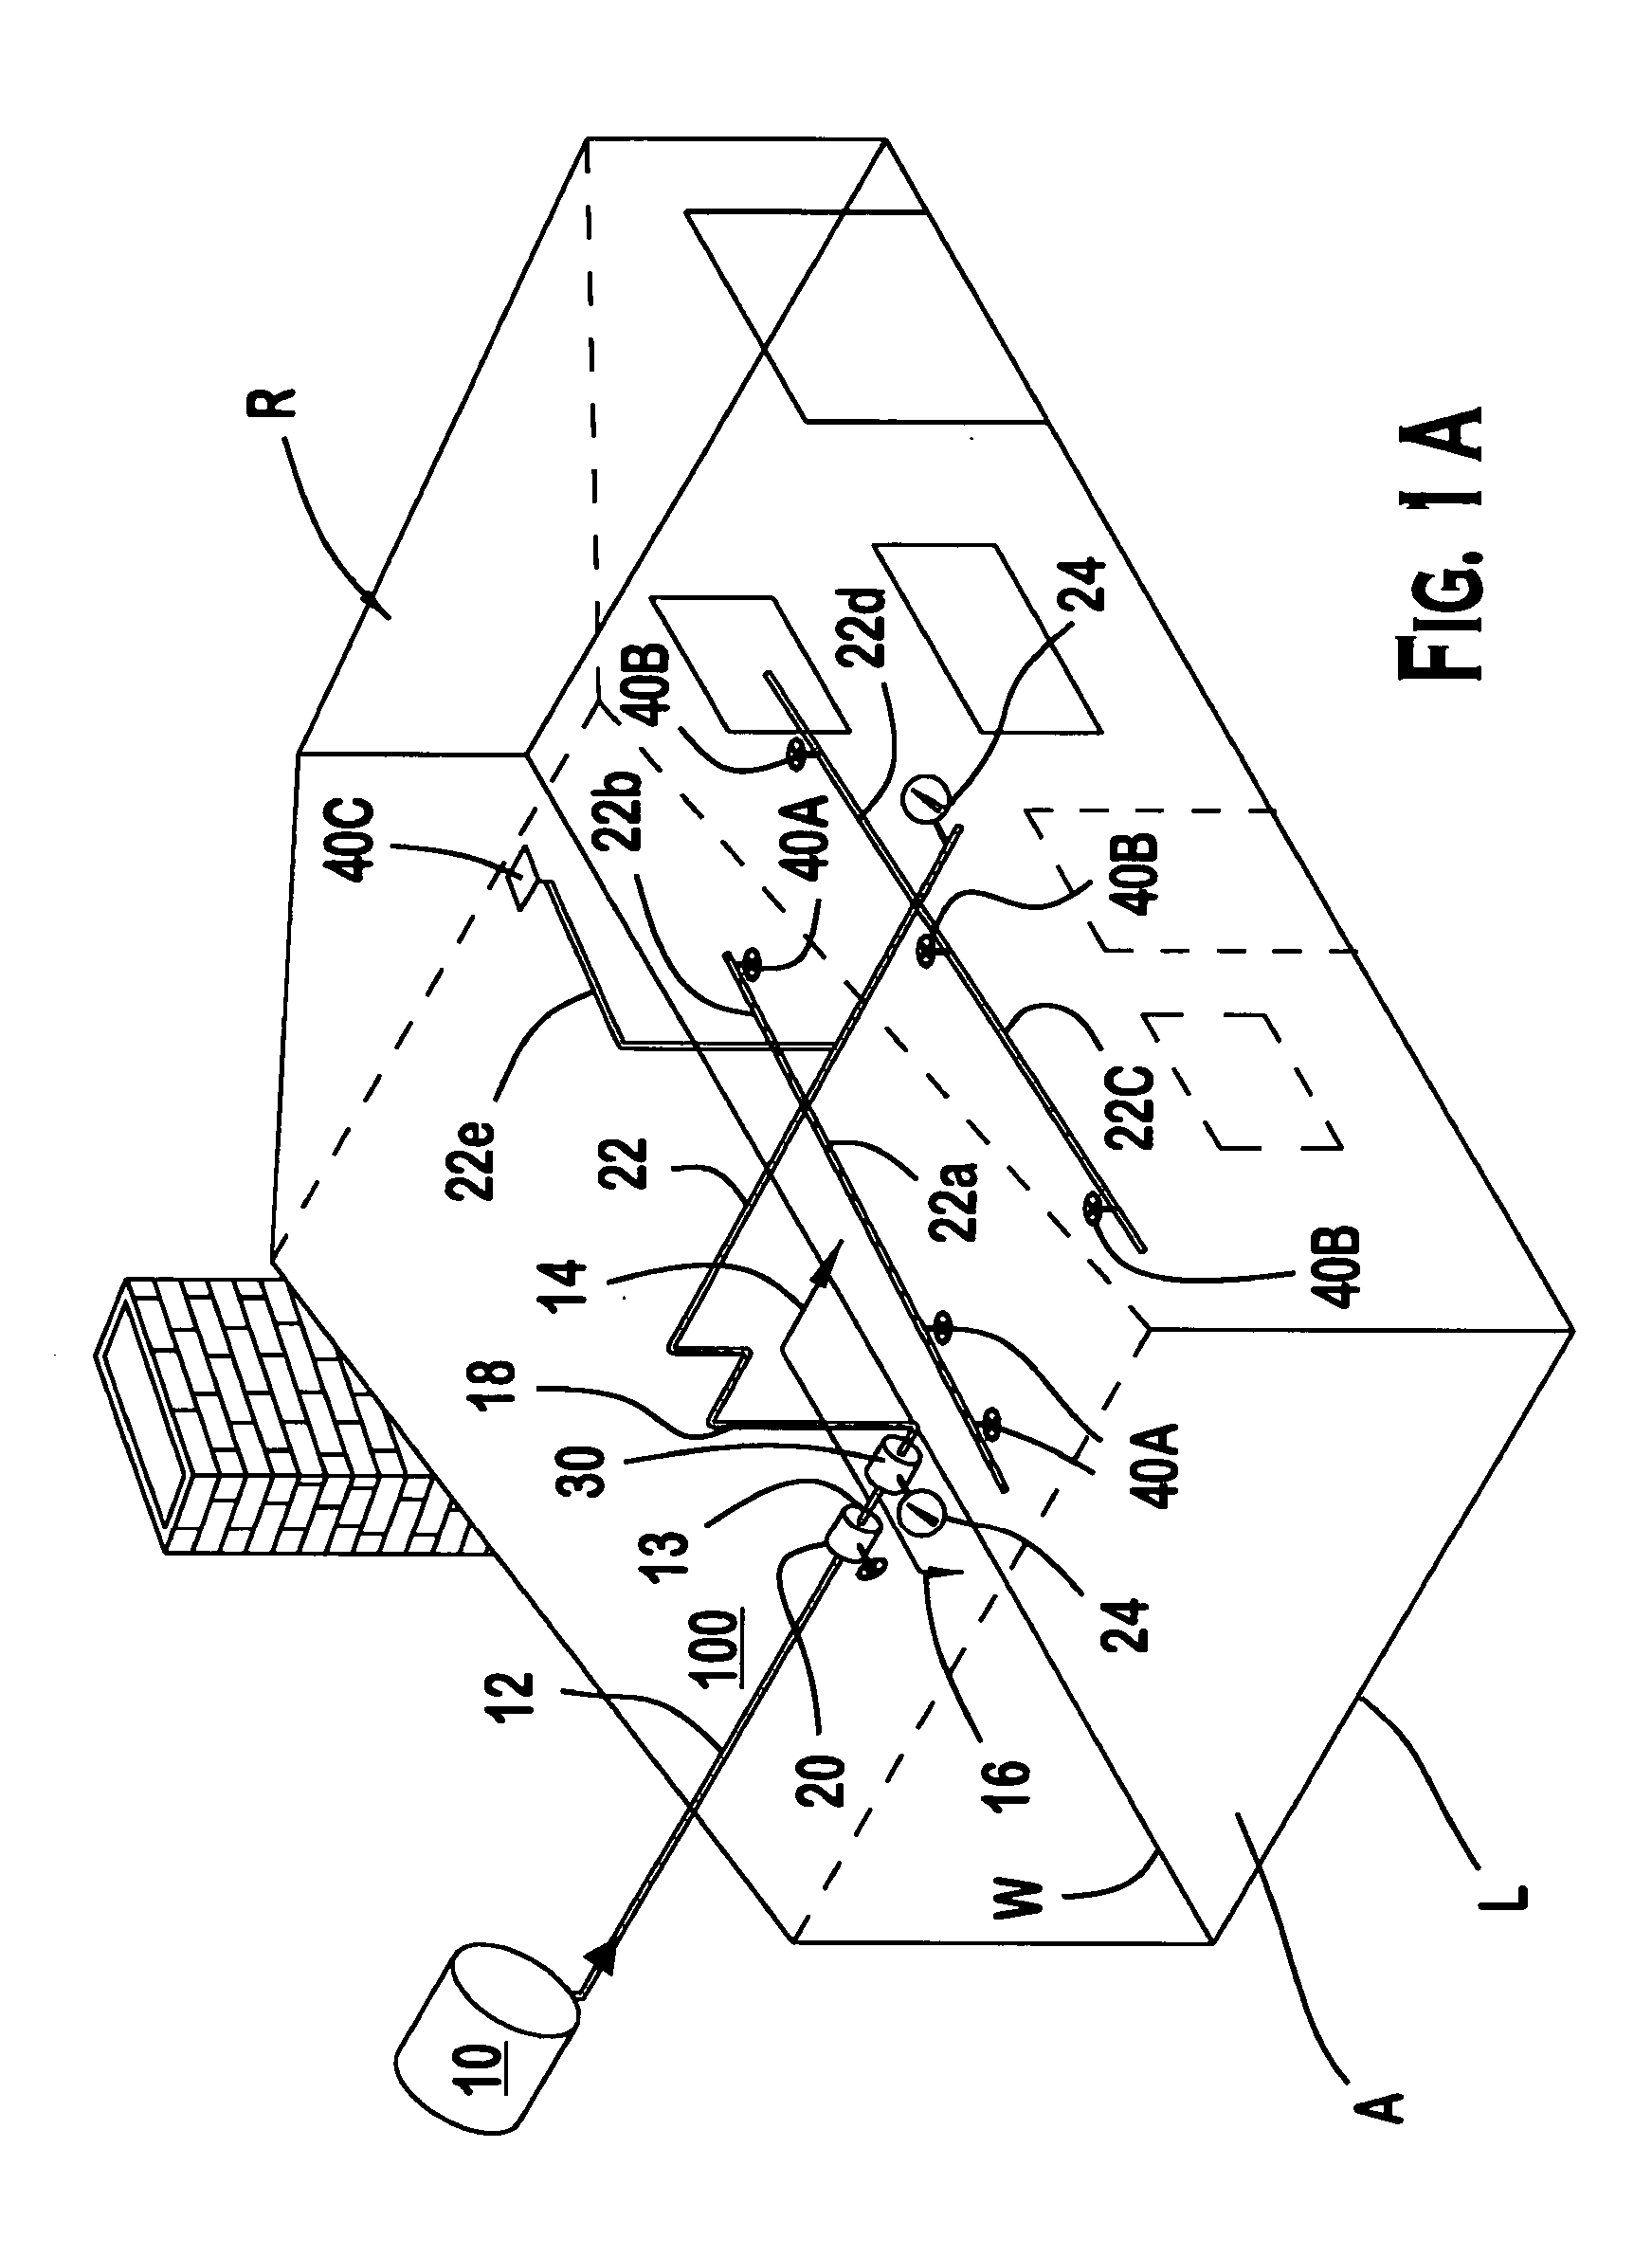 Non-interlock, preaction residential dry sprinkler fire protection system with a releasing control panel